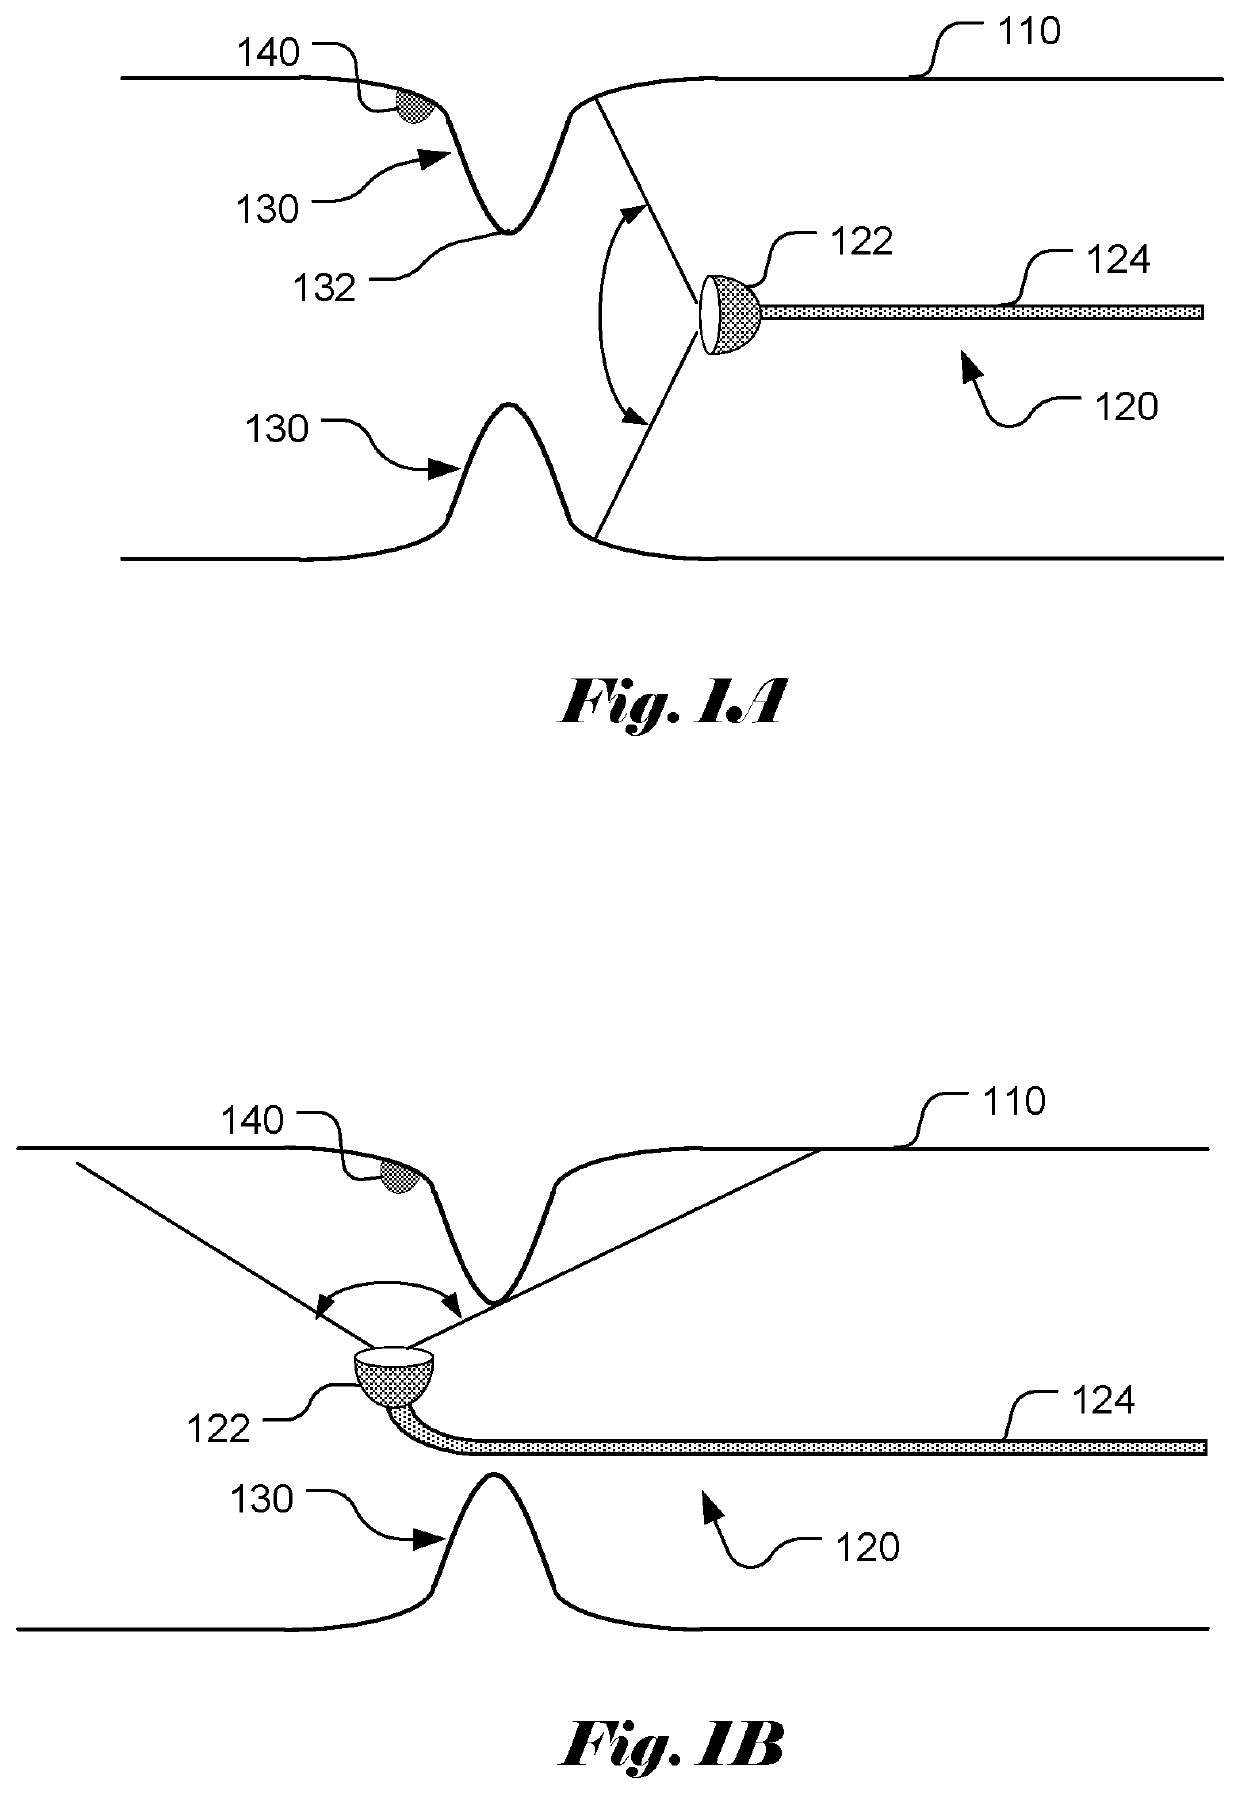 Method and Apparatus for Detecting Missed Areas during Endoscopy